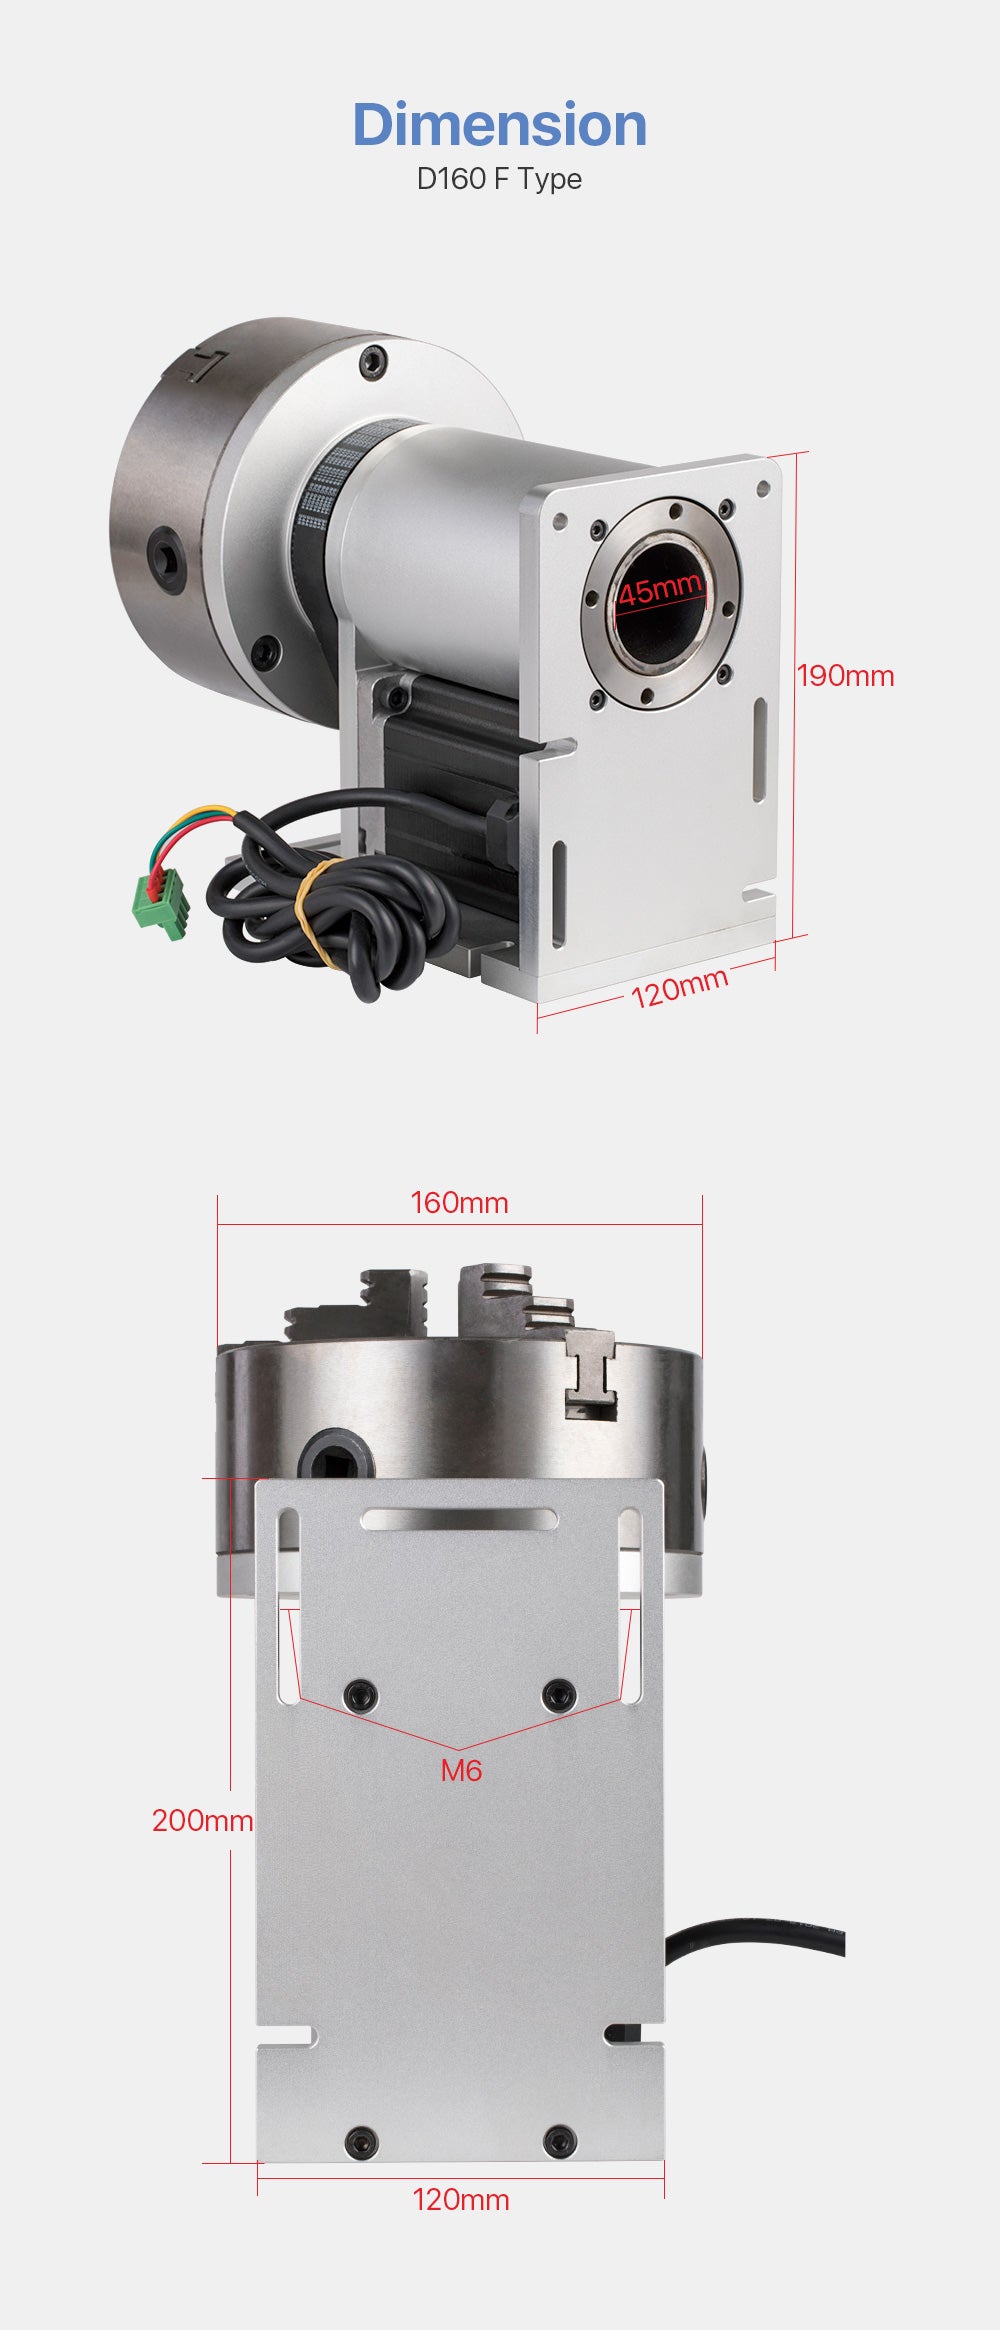 Rotary Attachment Diameter160mm Nema34 Motor and Driver for Cuboid Objects Circular Fiber Marking Machine